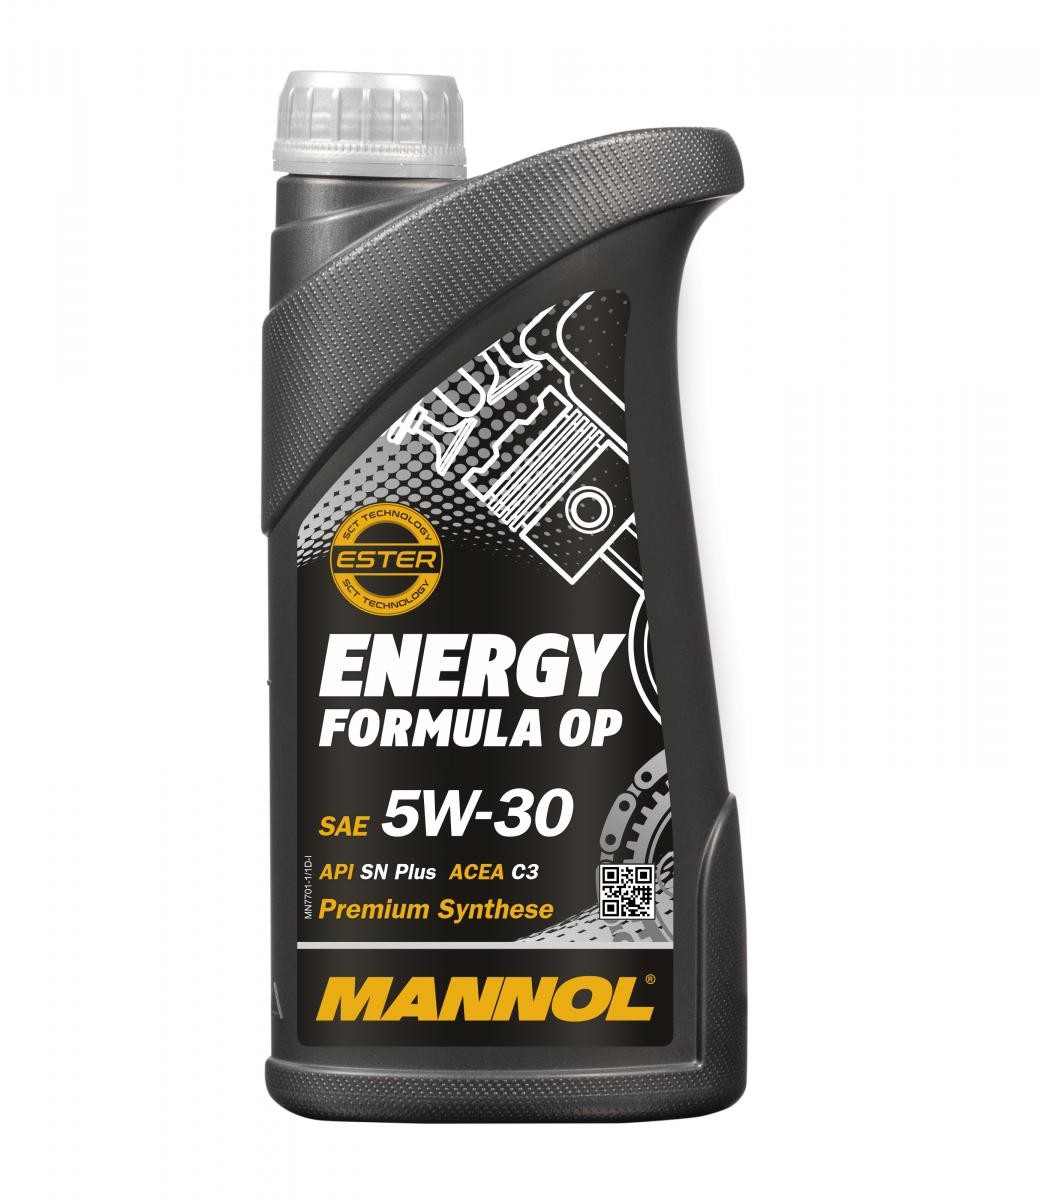 Engine oil MN7701-1 MANNOL O.E.M. 7701 5W-30, 1l, Full Synthetic Oil